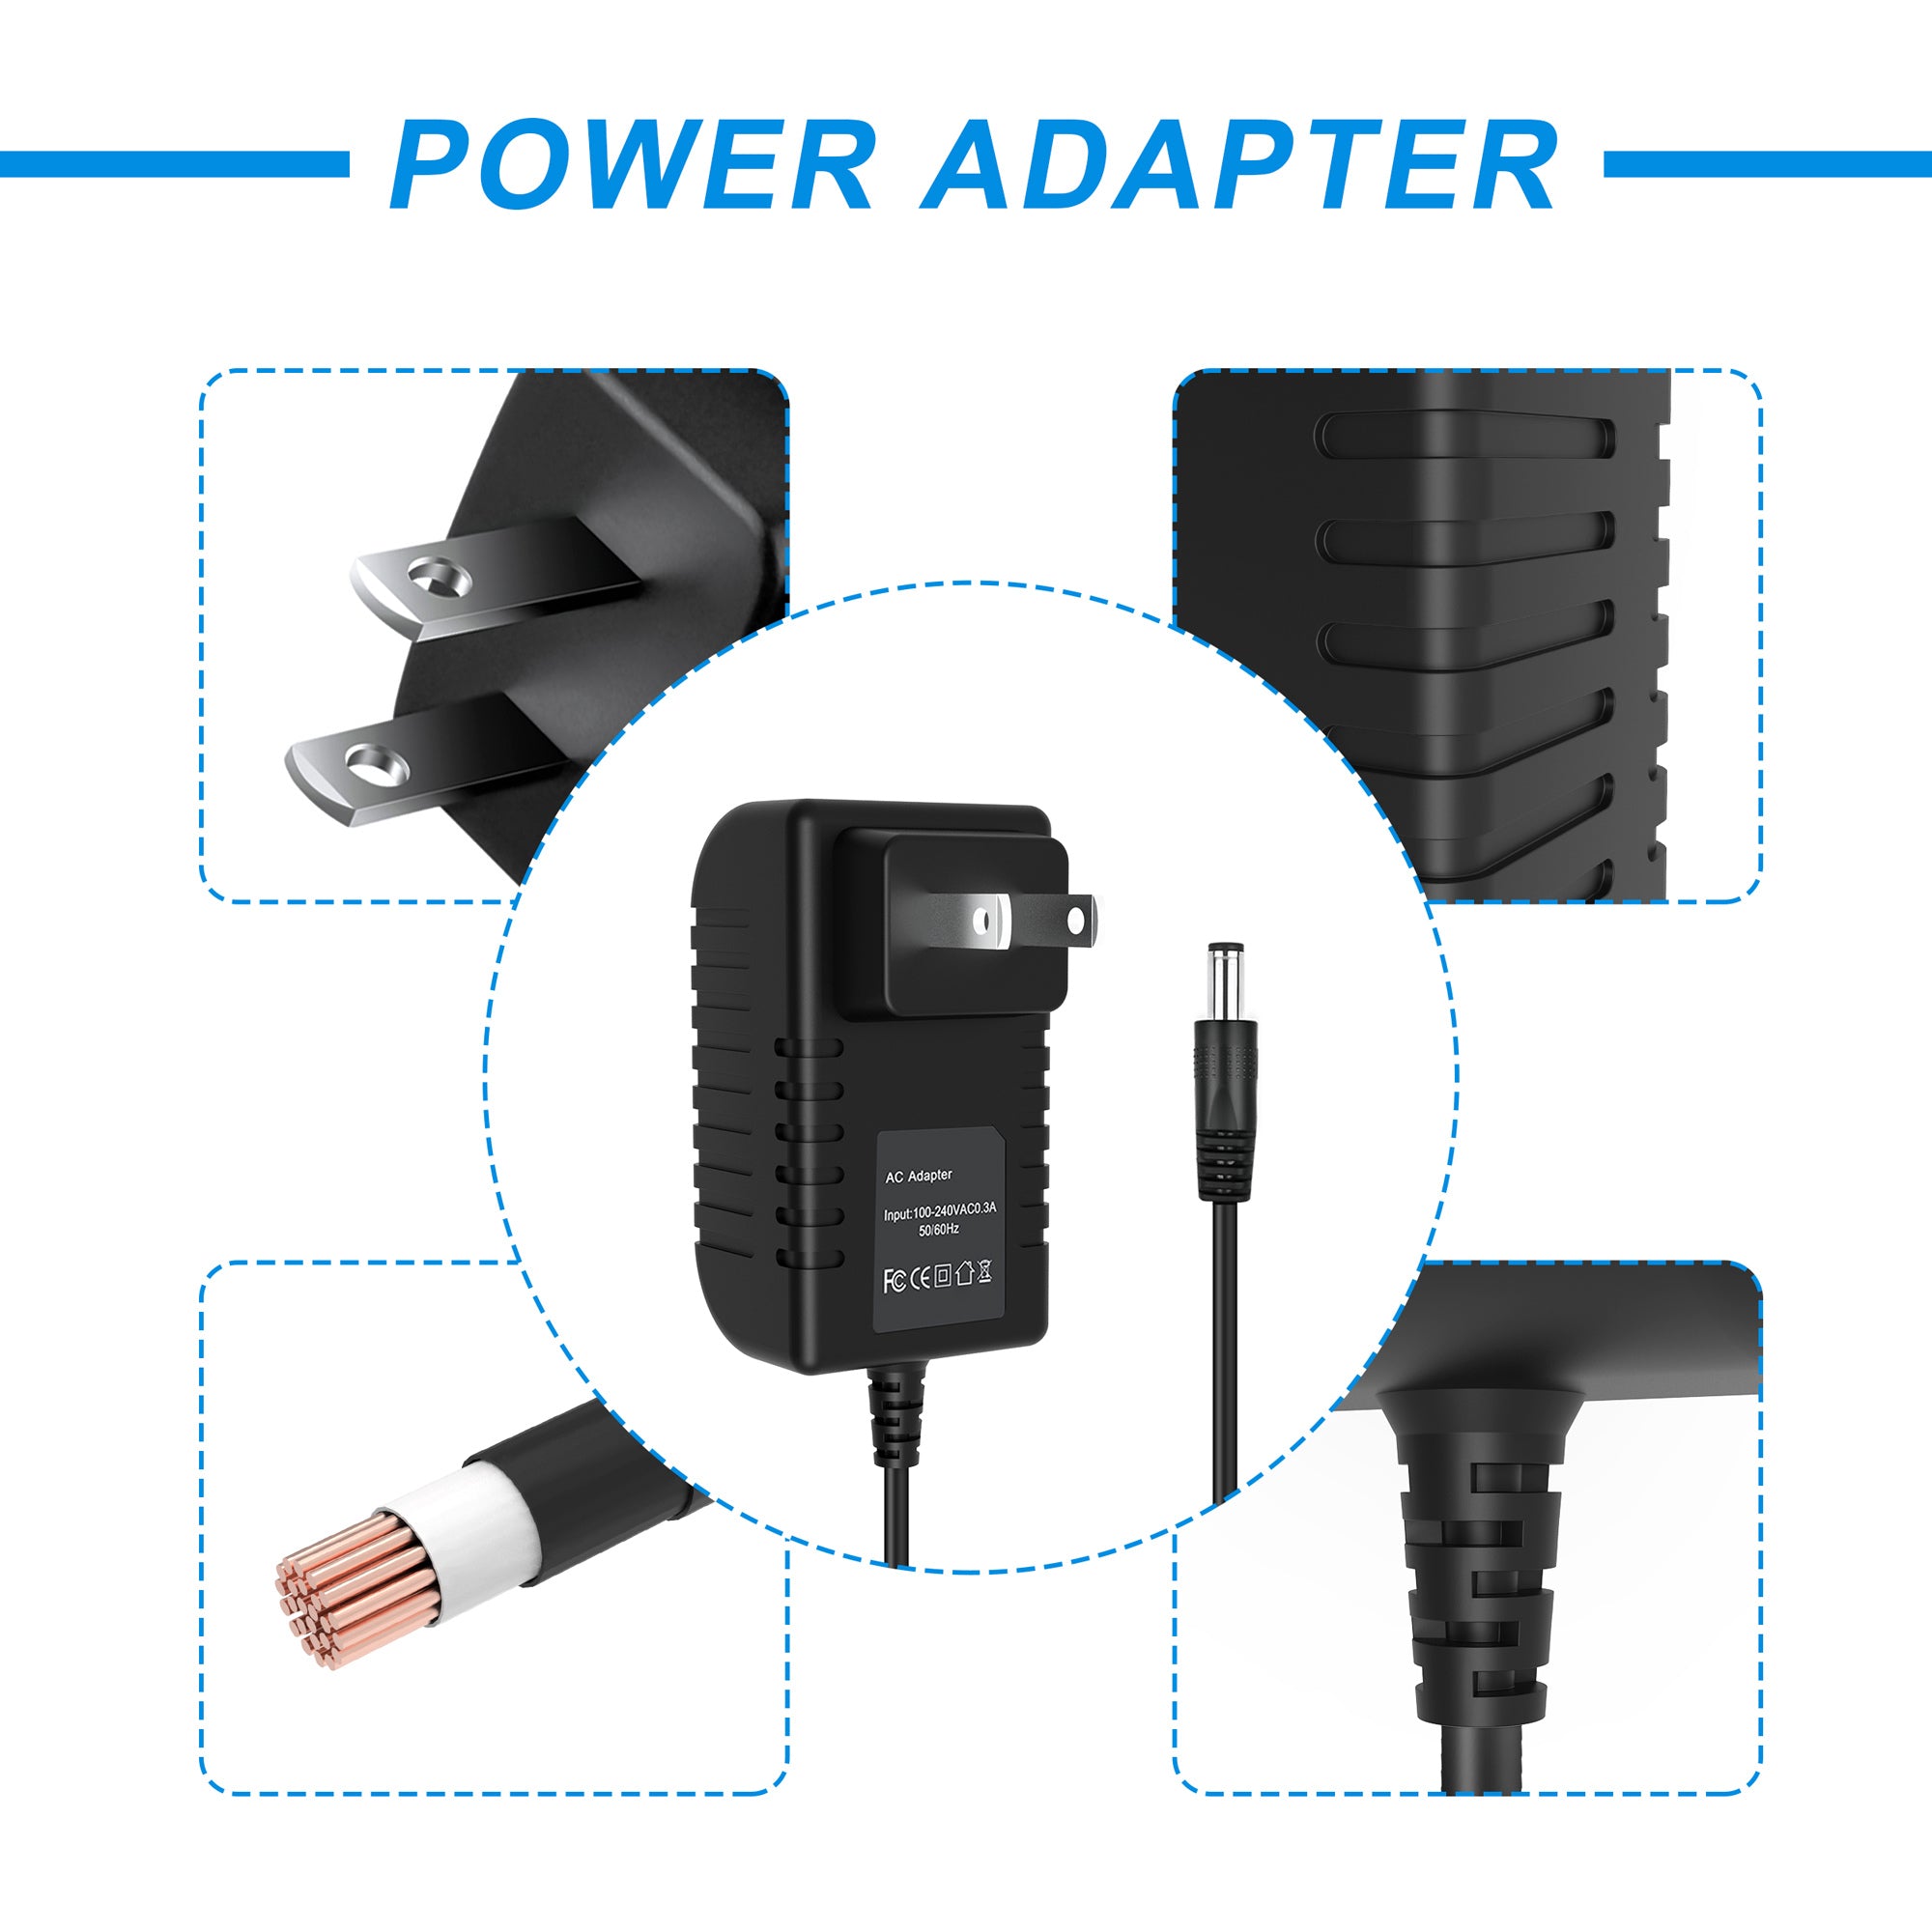 AbleGrid 5V AC/DC Adapter Compatible with NexStar SX NST-285U2-SL HDD Enclosure 5VDC Power Supply Cord Cable PS Wall Home Charger Input: 100 - 240 VAC 50/60Hz Worldwide Voltage Use Mains PSU